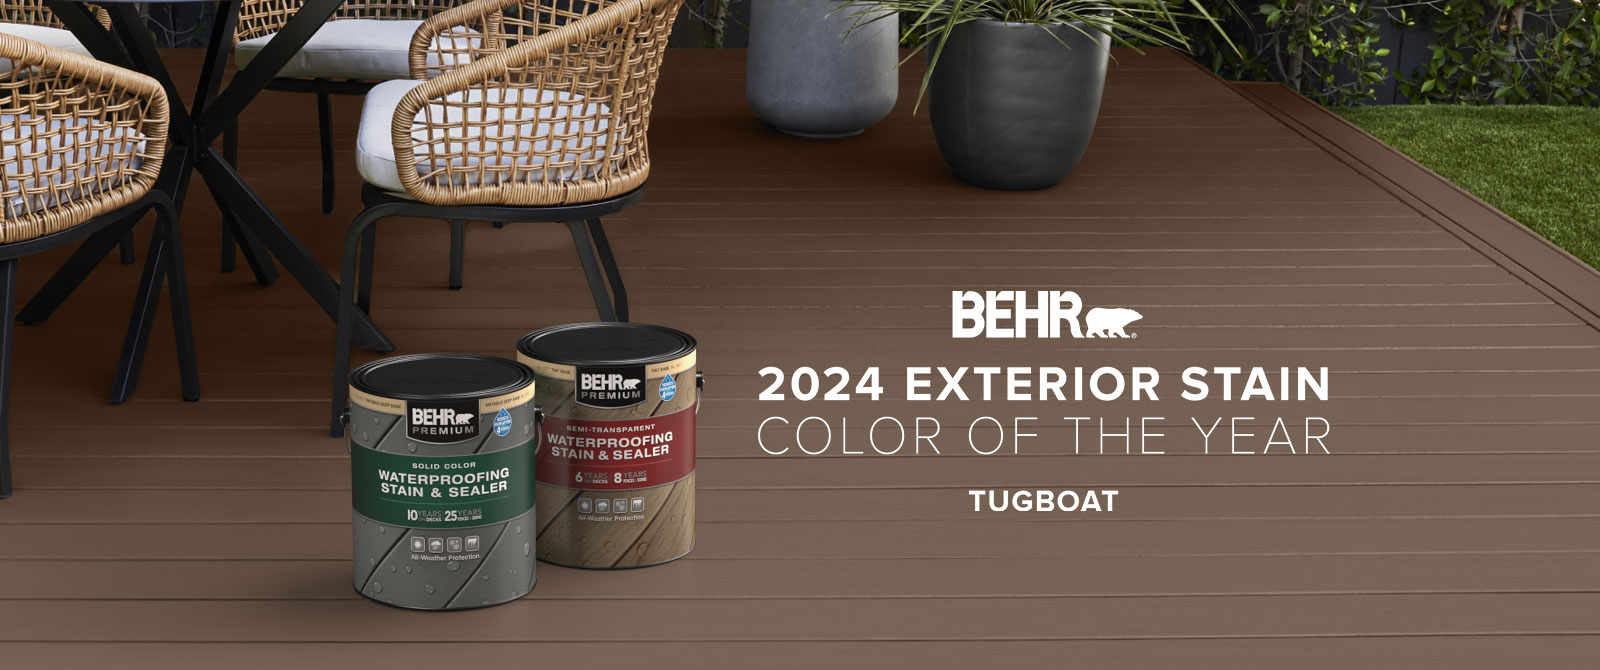 2024 Exterior Stain Color of the Year - Tugboat